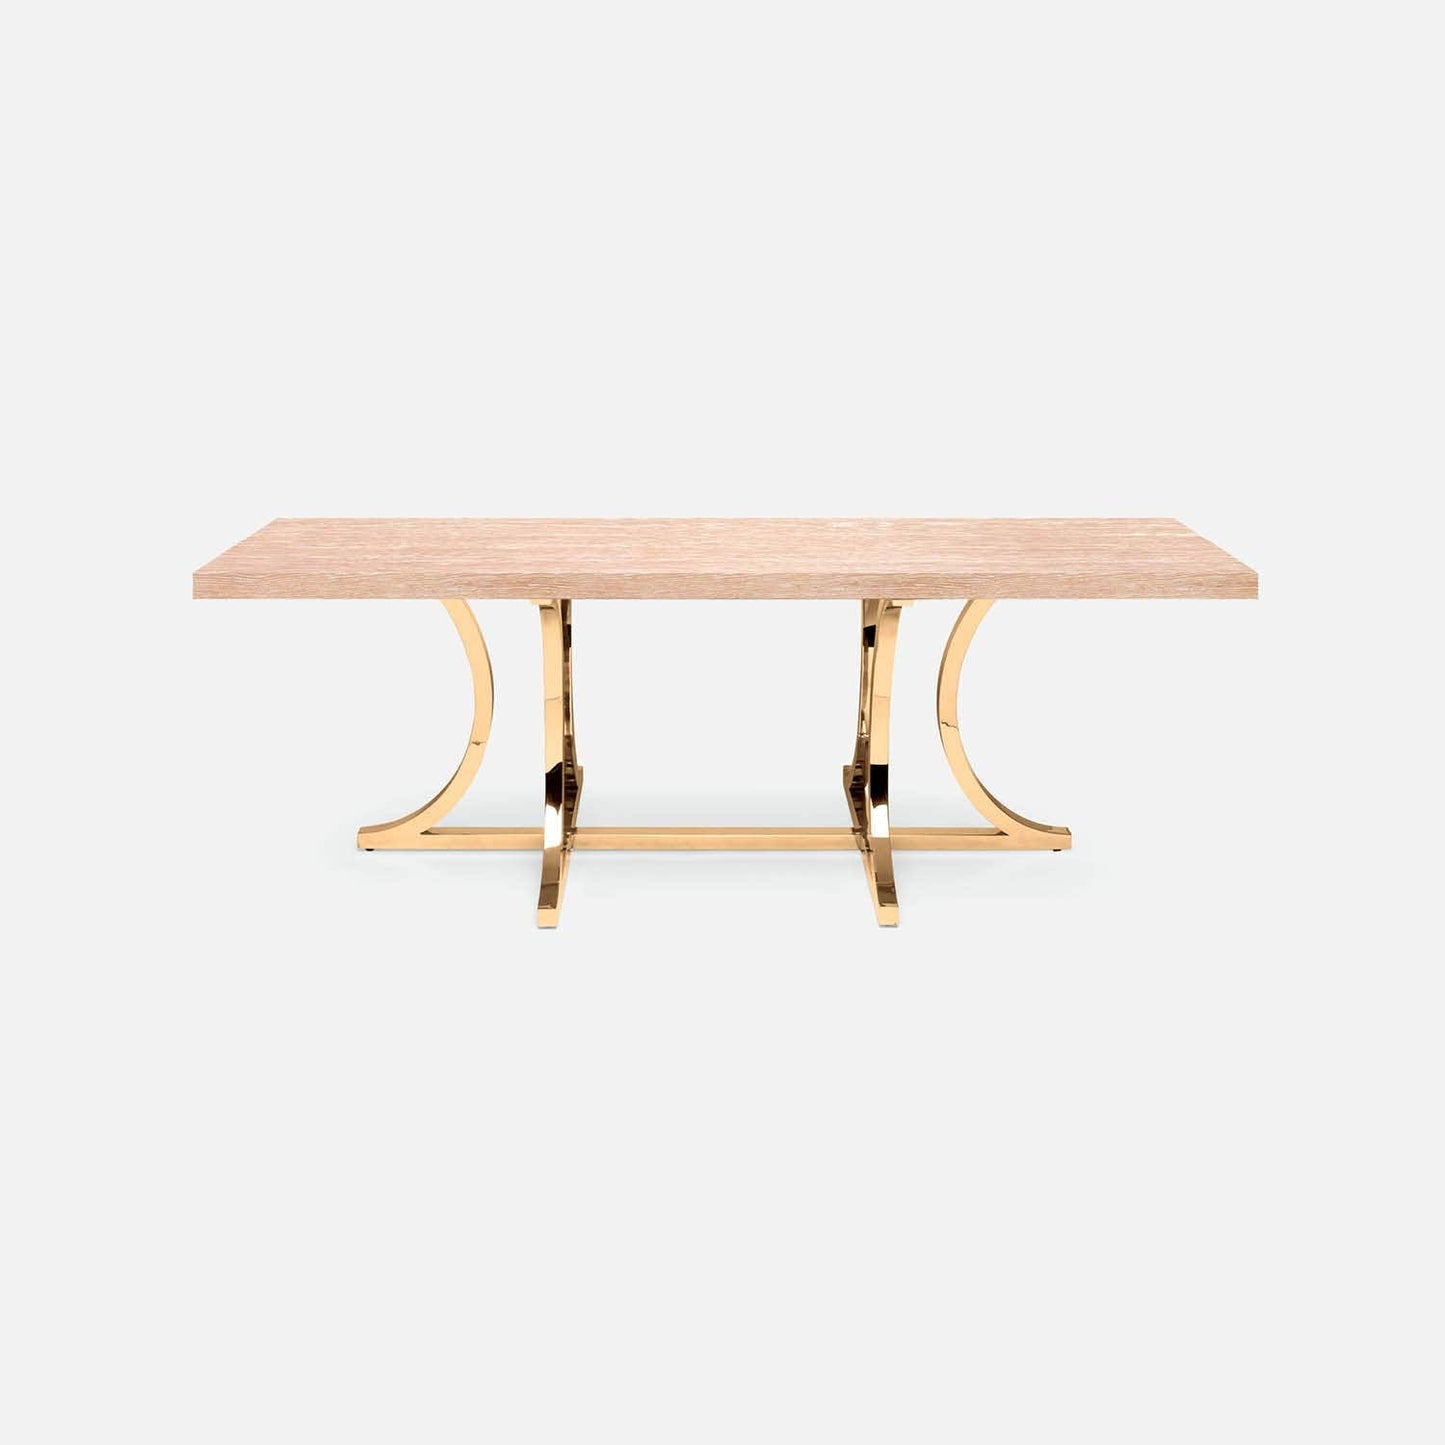 Made Goods Leighton 110" x 40" x 30" Polished Brass Steel Dinning Table With Rectangle White Cerused Oak Table Top